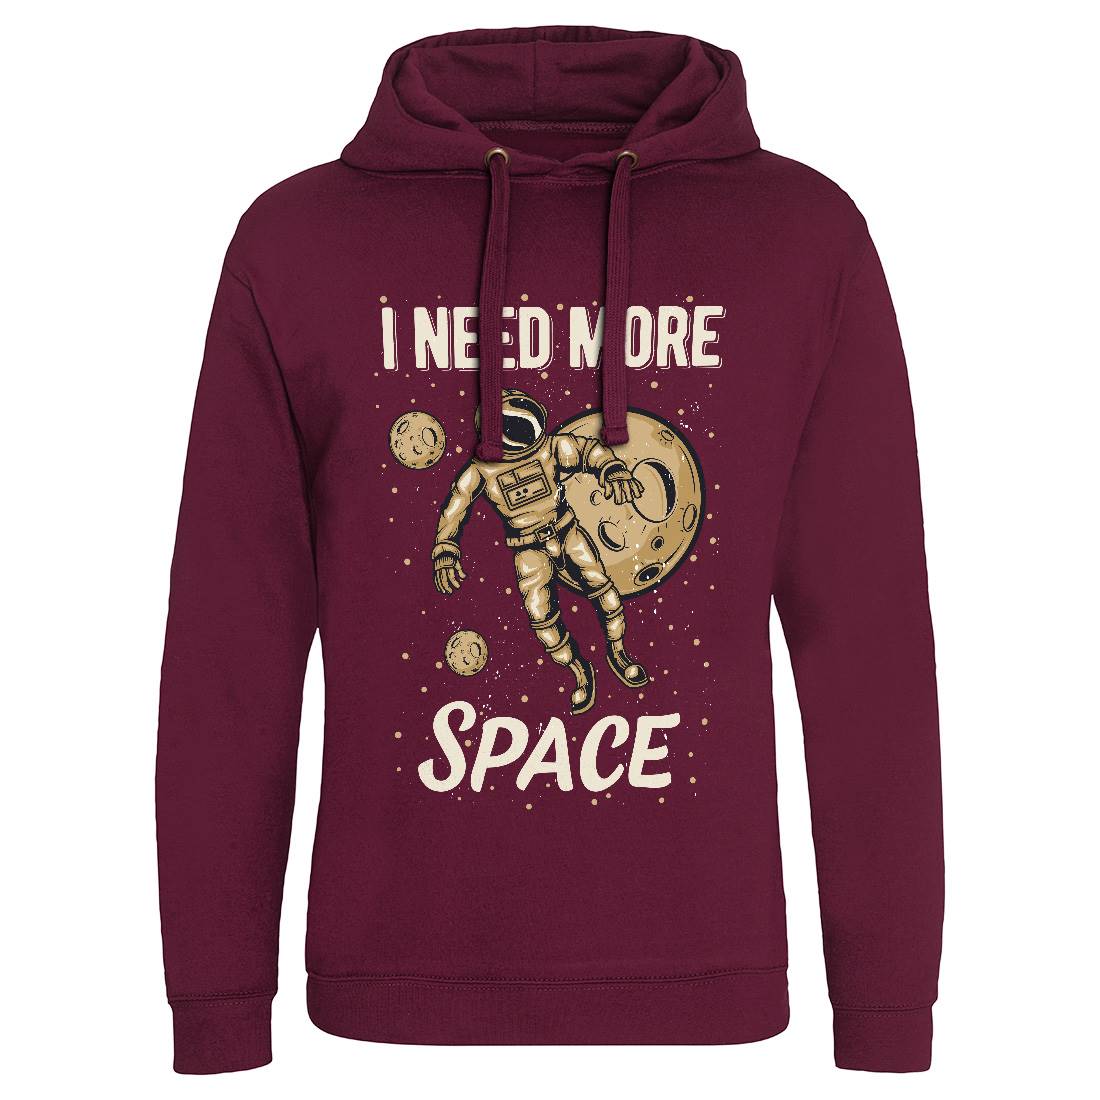 Need More Mens Hoodie Without Pocket Space B168